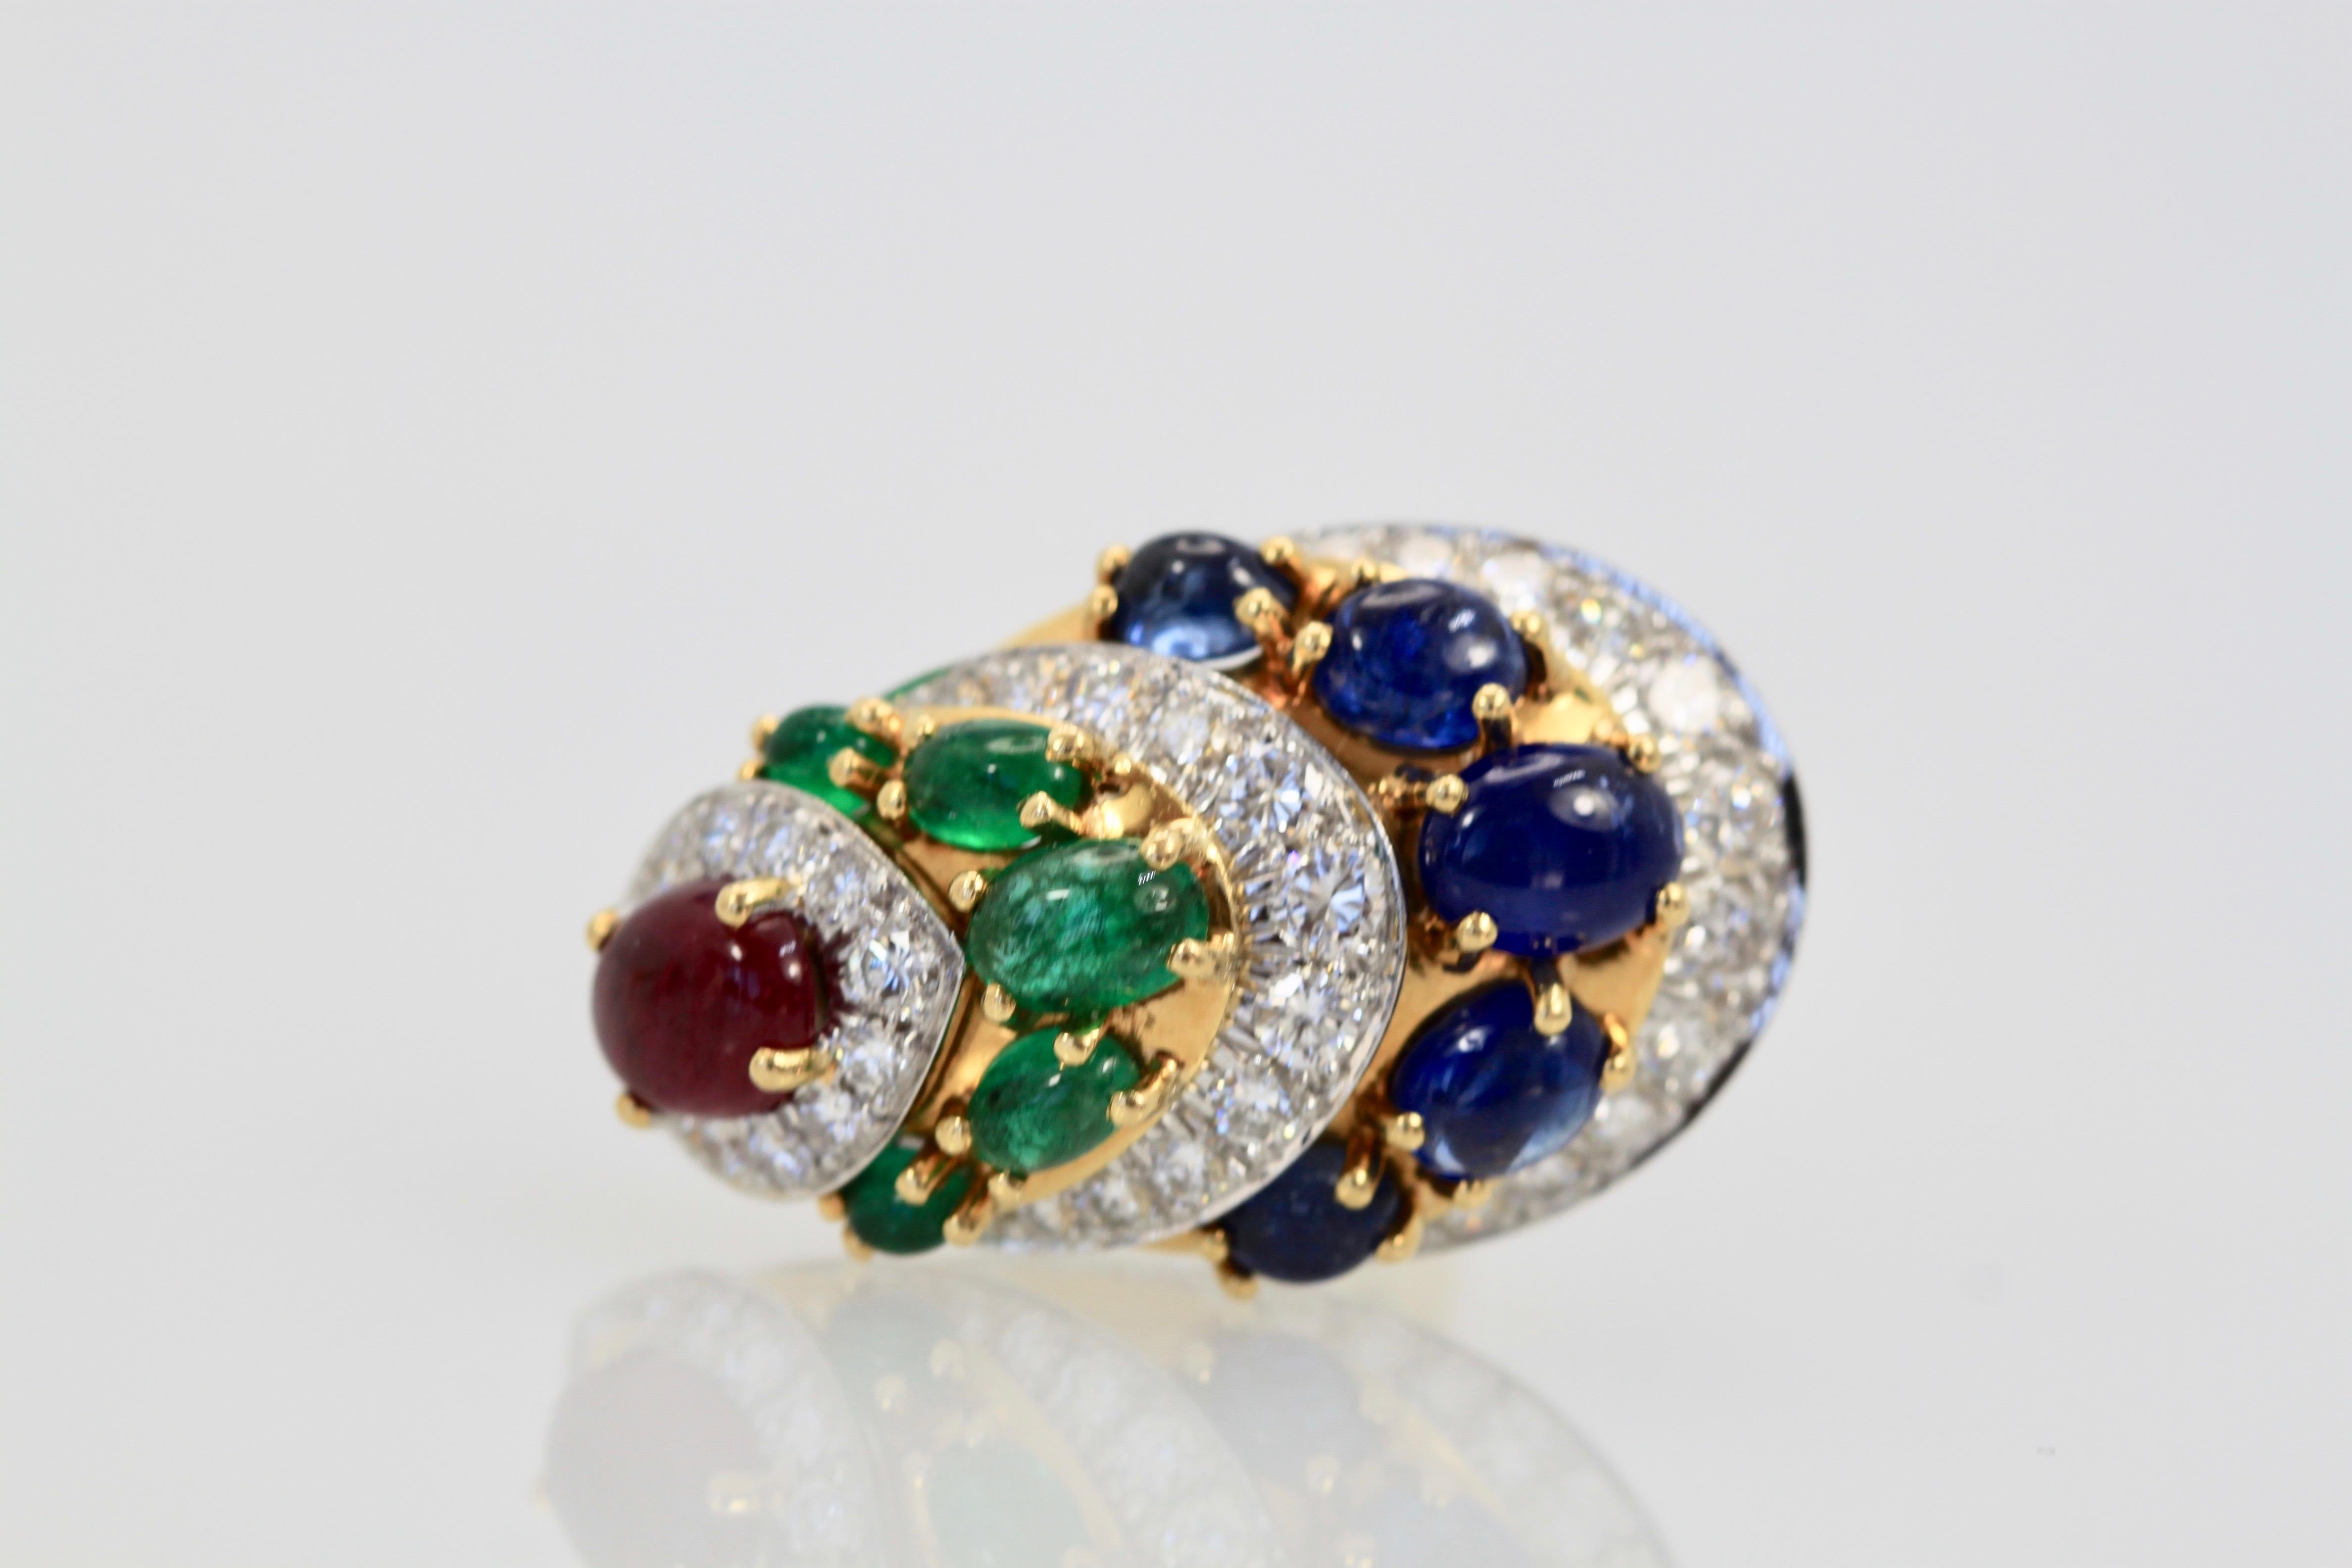 These David Webb Sapphire, Emerald, Ruby, Diamond earrings are stunning.  They are 3cm x 1.5cm and holds 5 Sapphires, 5 Emeralds, 5 Rubies and covered in Diamonds.  18K Yellow Gold the gemstones weigh approximately 5 carats with 2 carats of